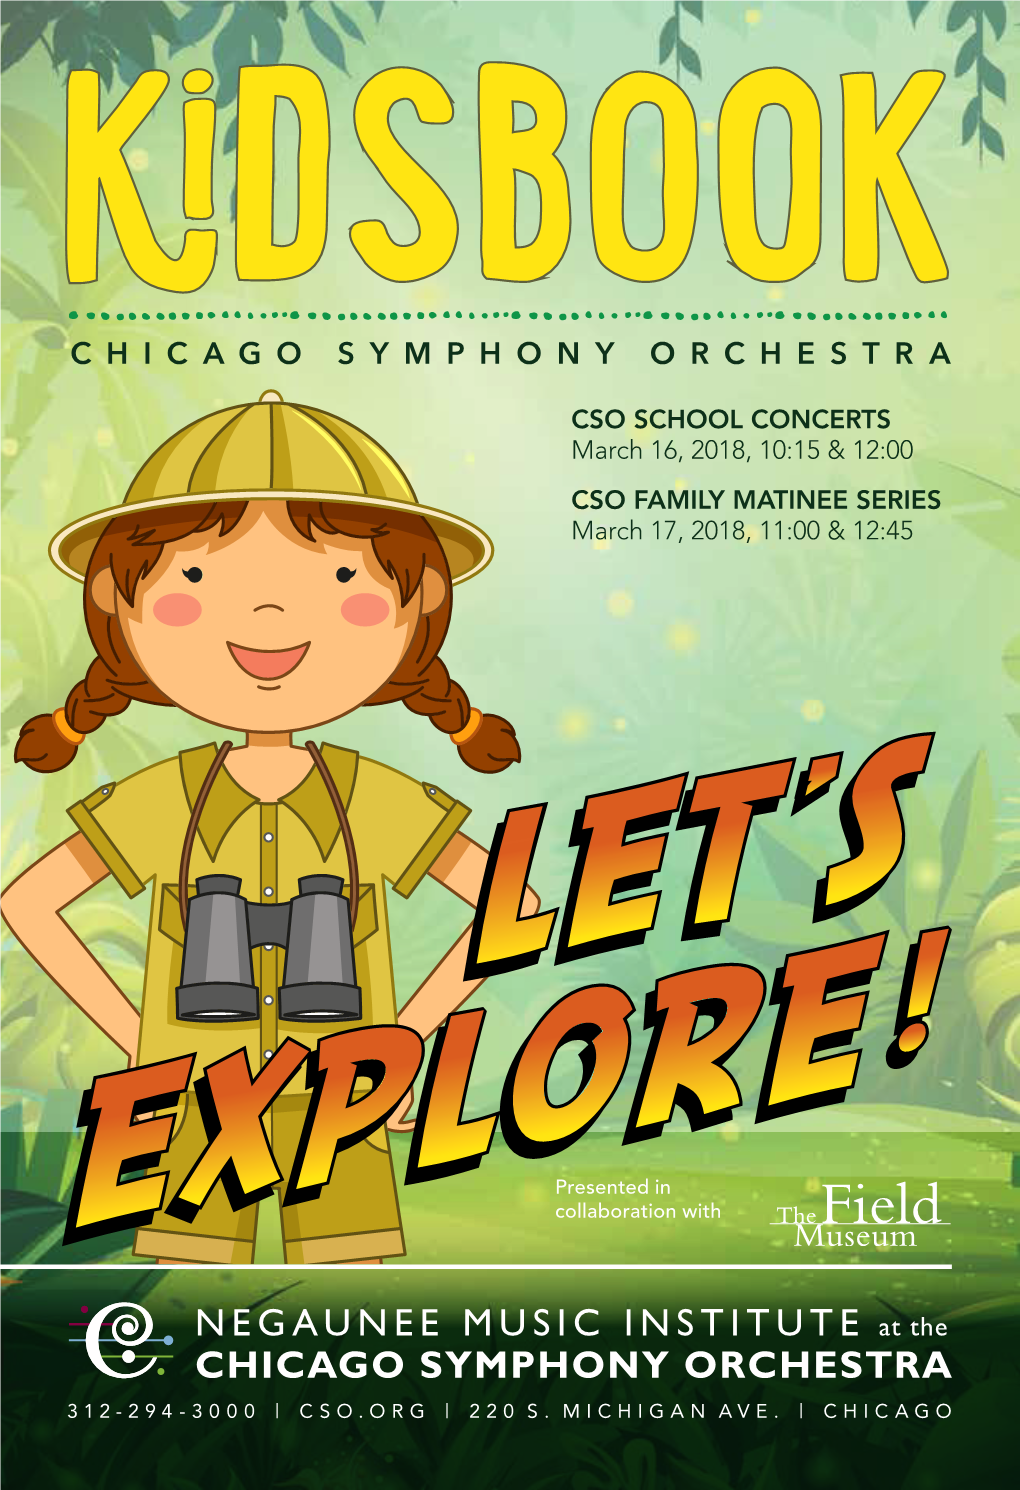 Kidsbook © Is a Publication of the Negaunee Music Institute